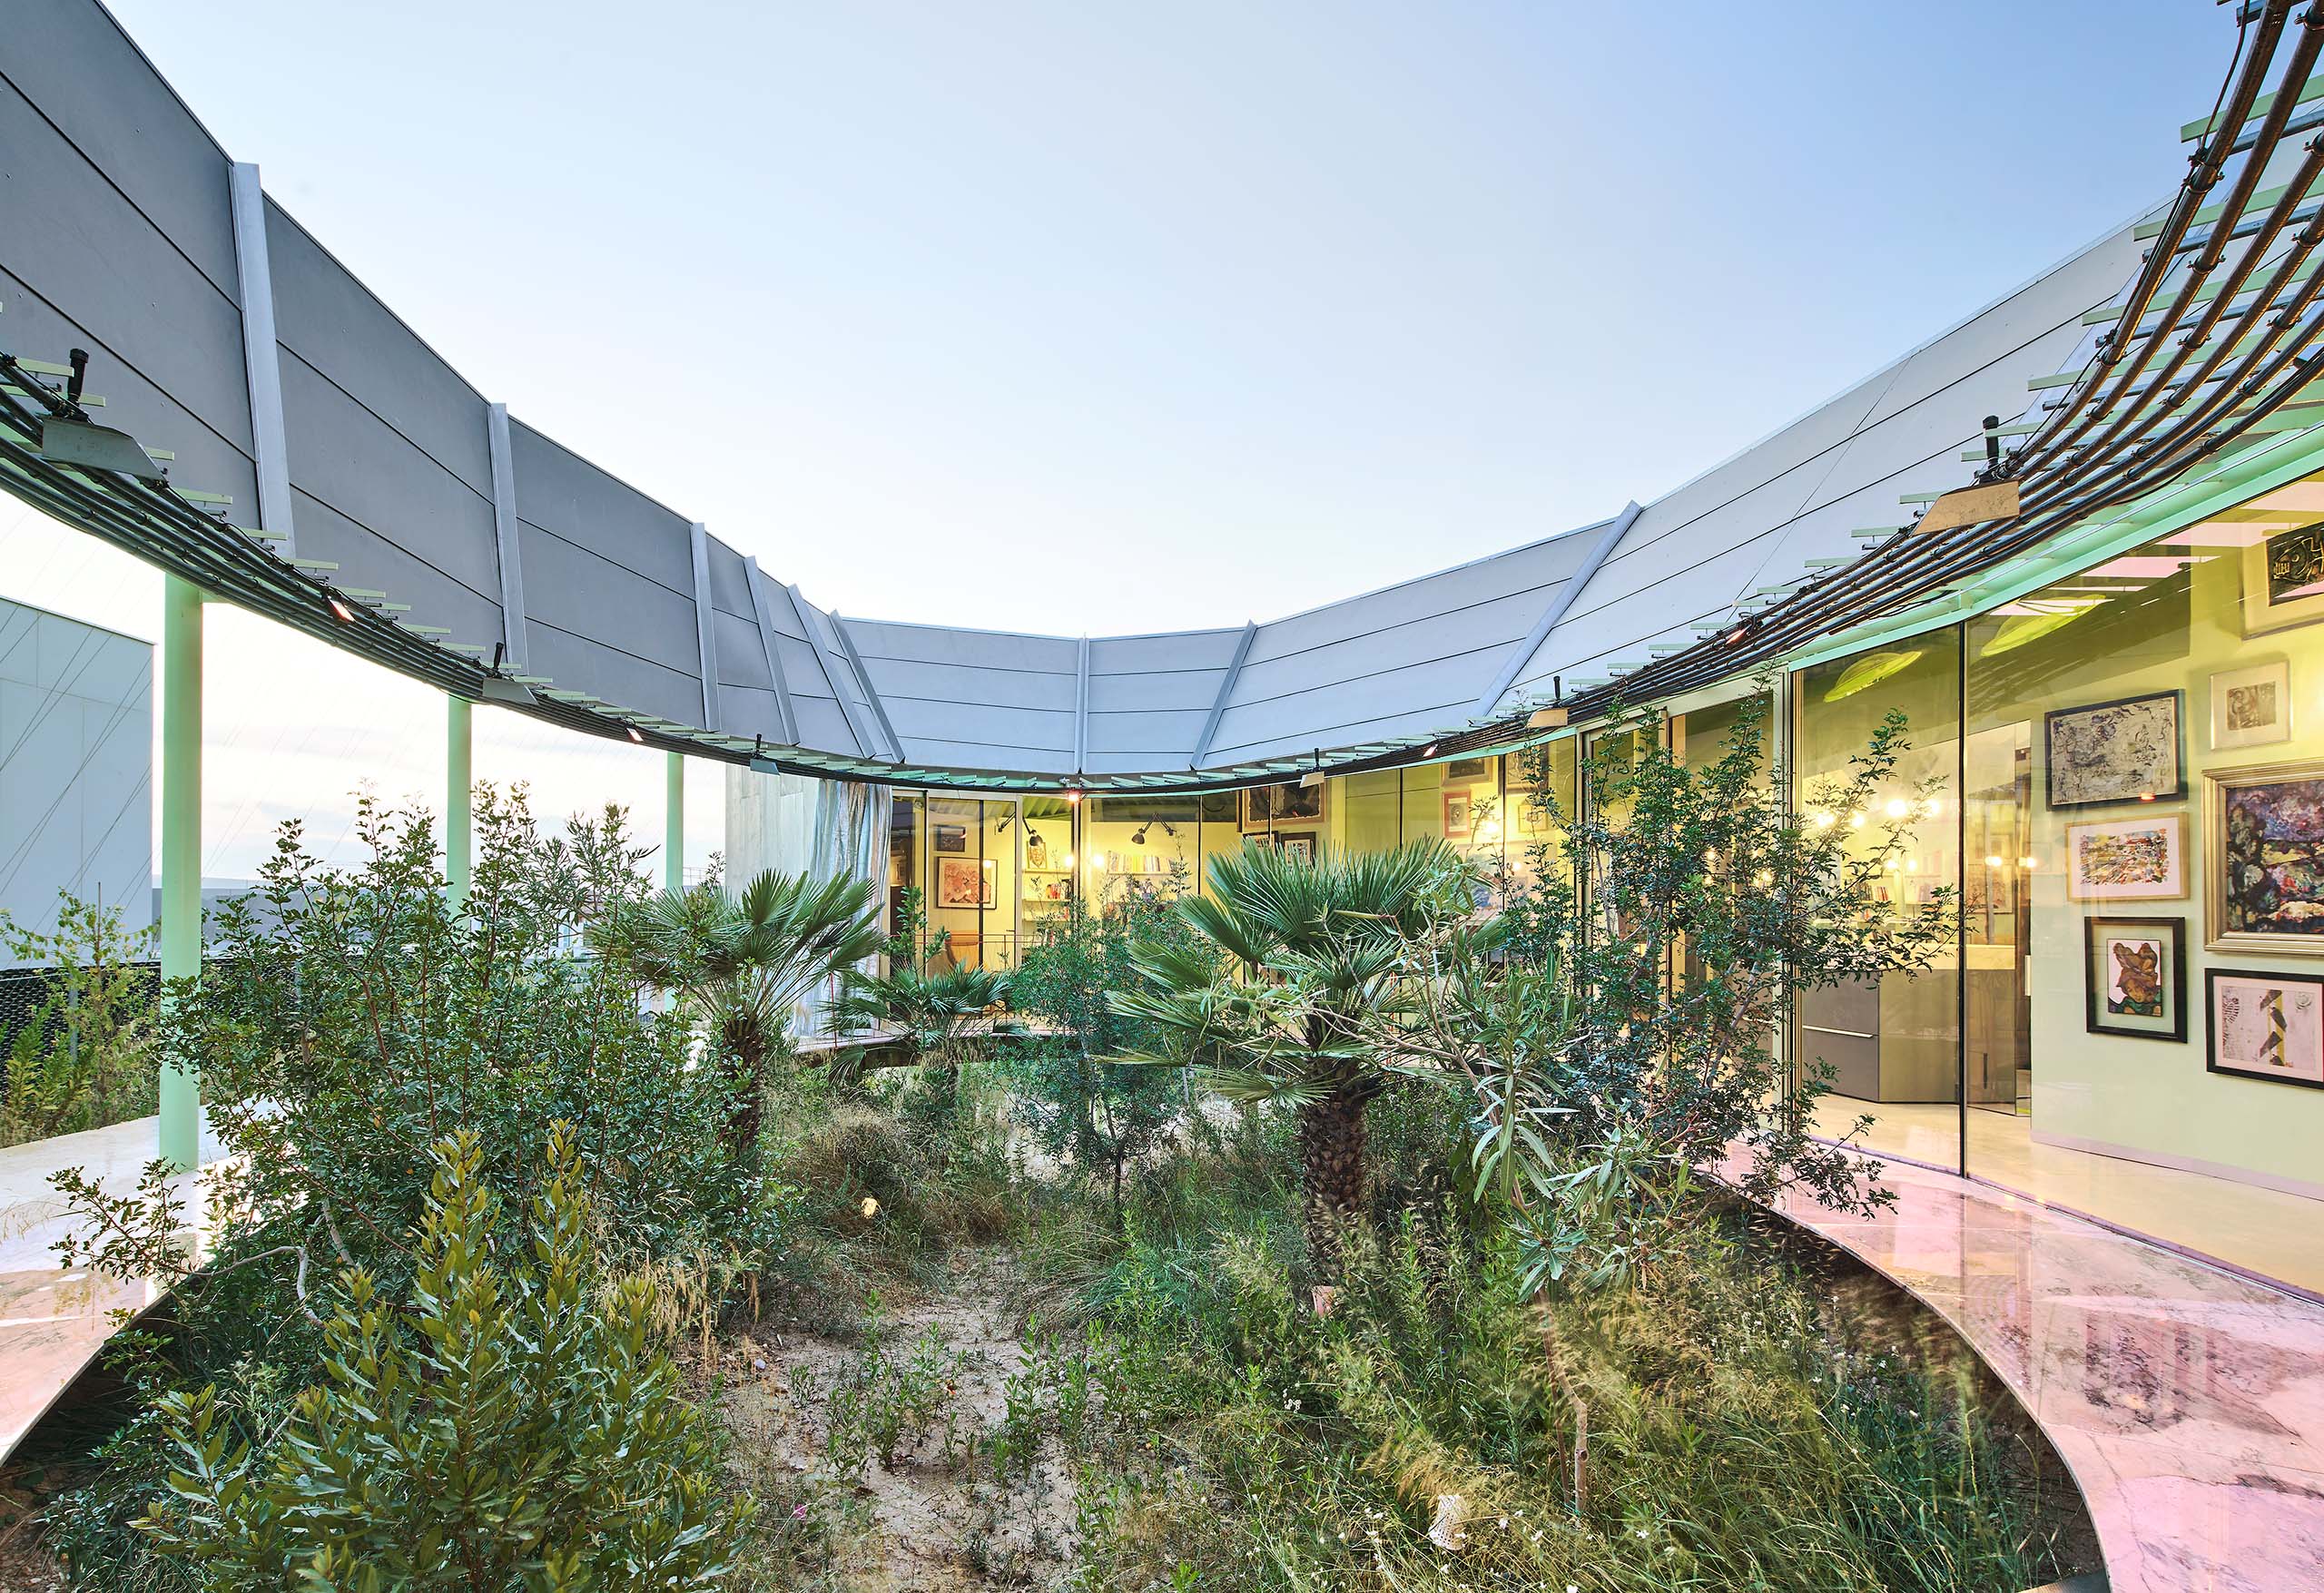 Rambla Climate-House lands on a Spanish ravine to repair its ecosystem